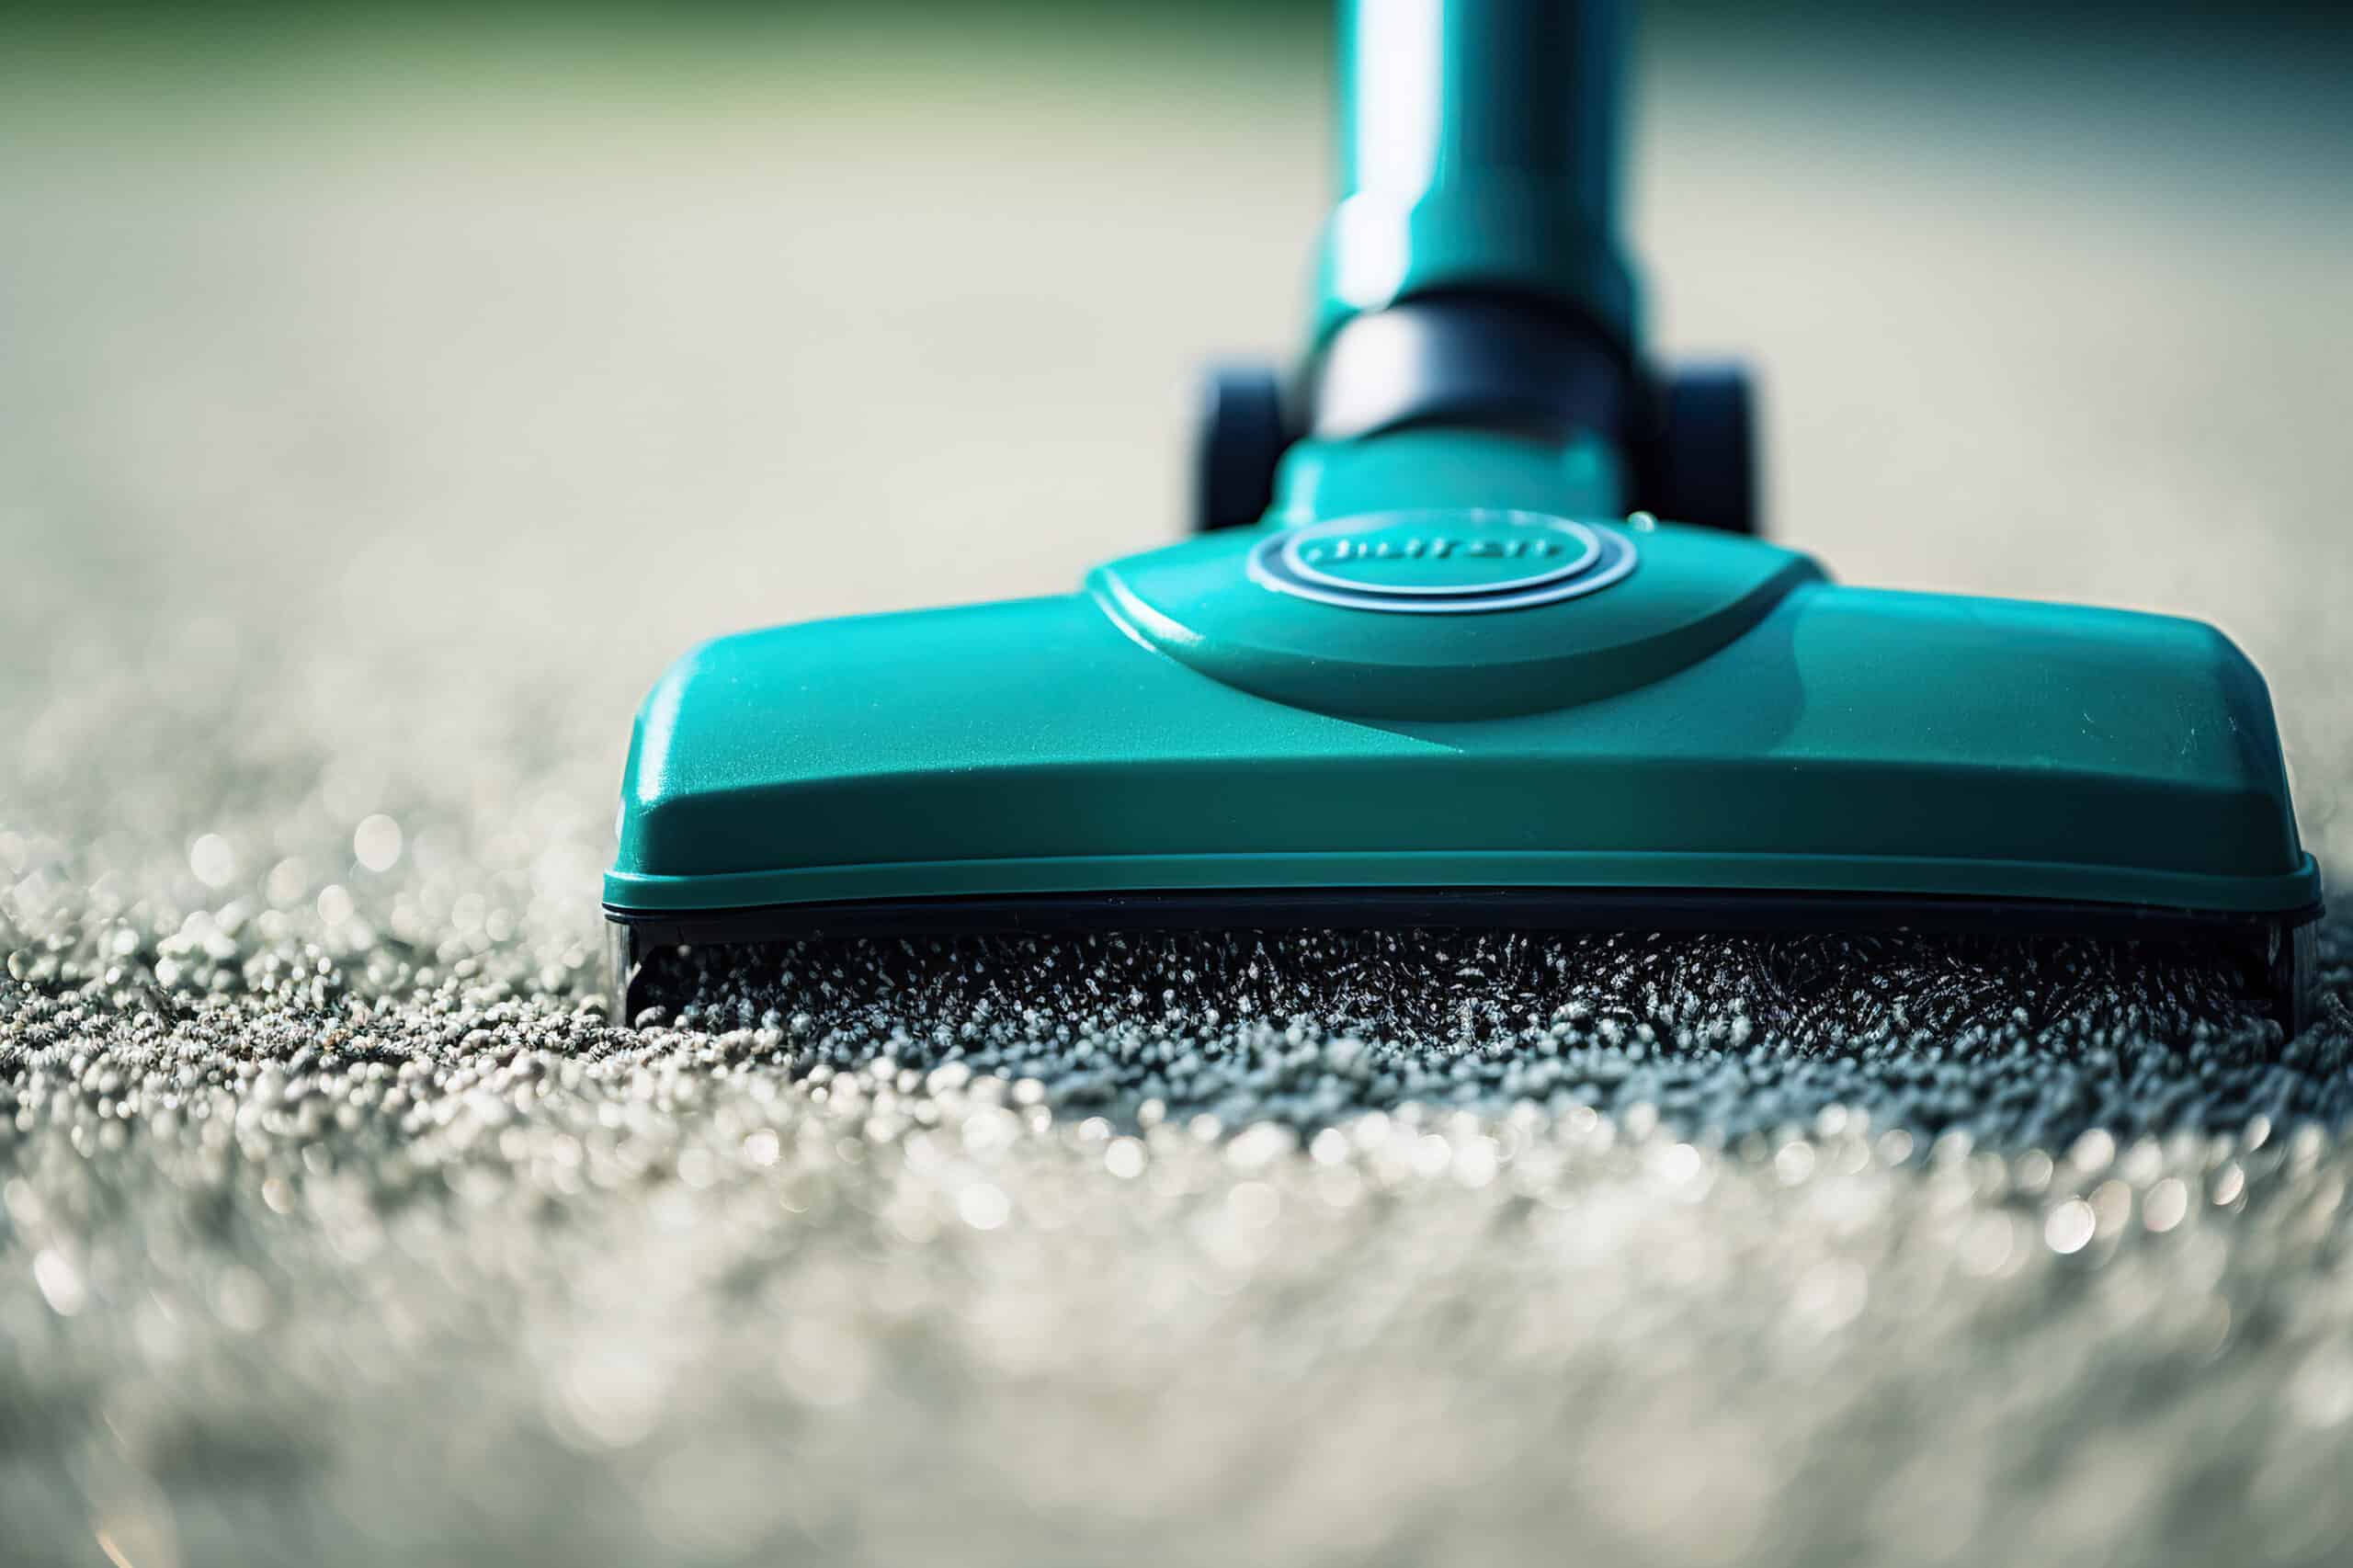 www.appr.com : What is the difference between a steam cleaner and a regular carpet cleaner?